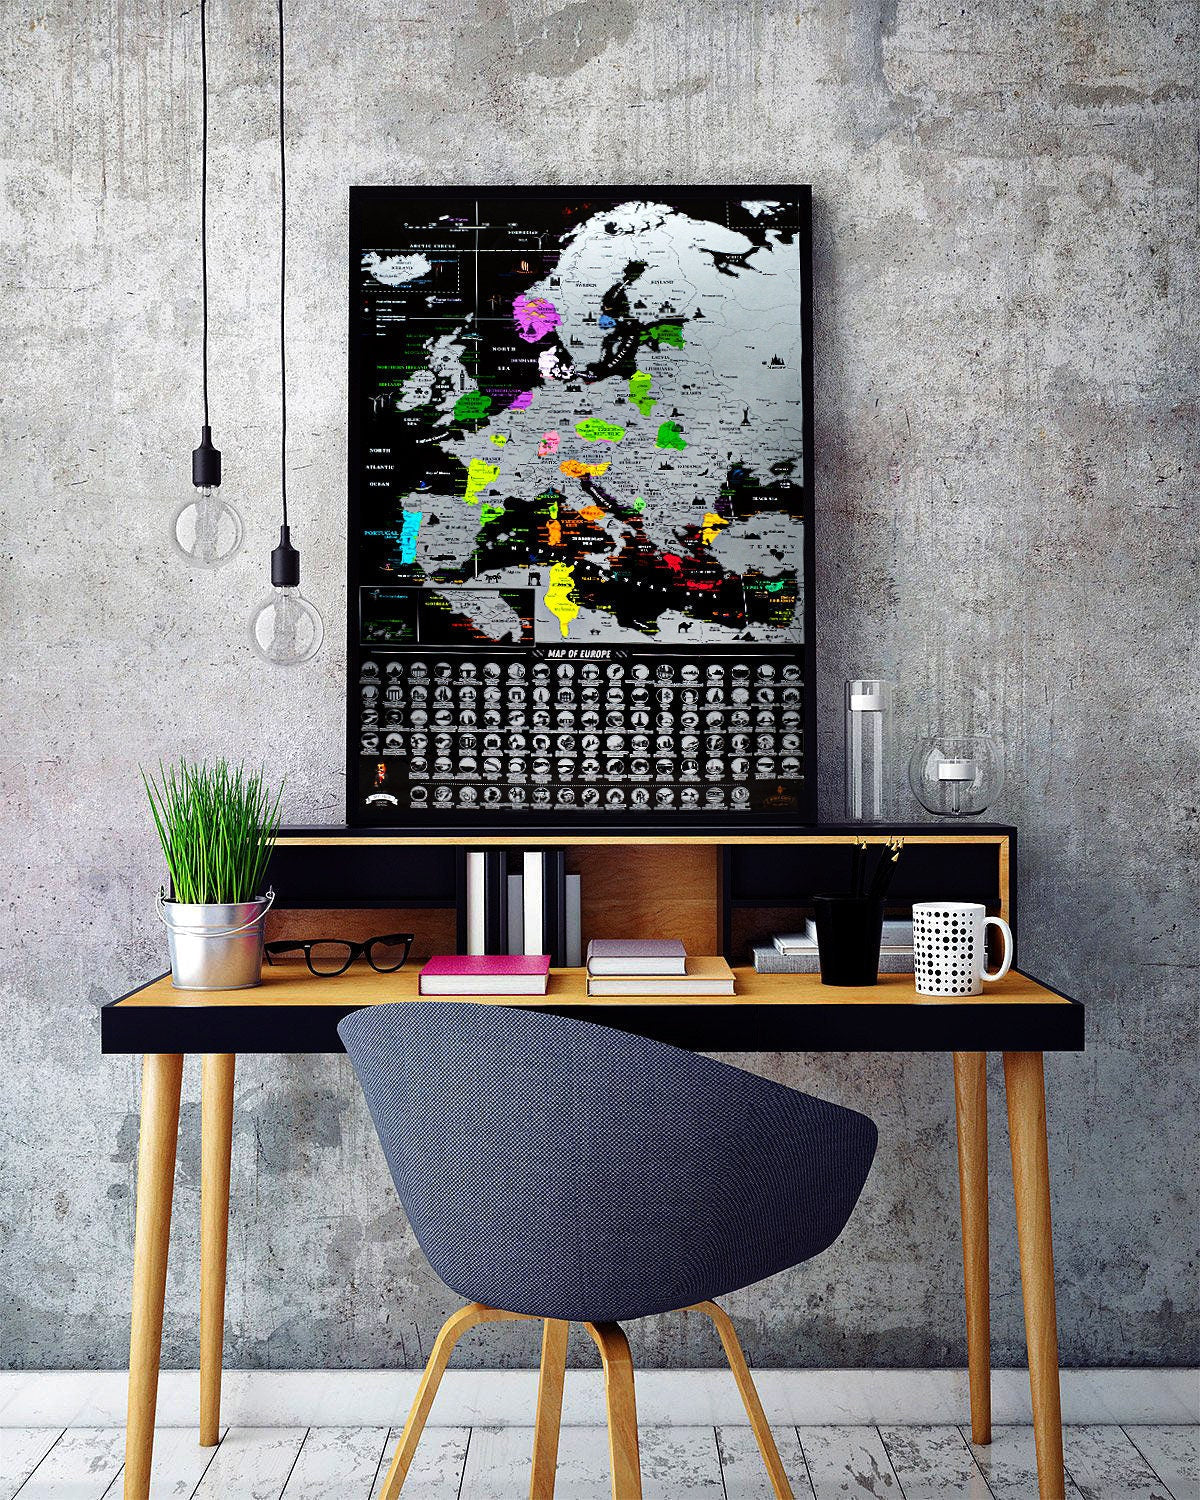 100 places Europe  best places europe  black scratch map europe  black map of europe  europe map to scratch  wall_poster_map  wall_europe_map  scratch_the_world  scratch_off_map  scratch_map_europe  mymap_travel_map  mymap_map_of_Europe  map_travels  large_Europe_map  framed_europe  Europe_detailed_map  bucket_list_scratch  black_map_Europe